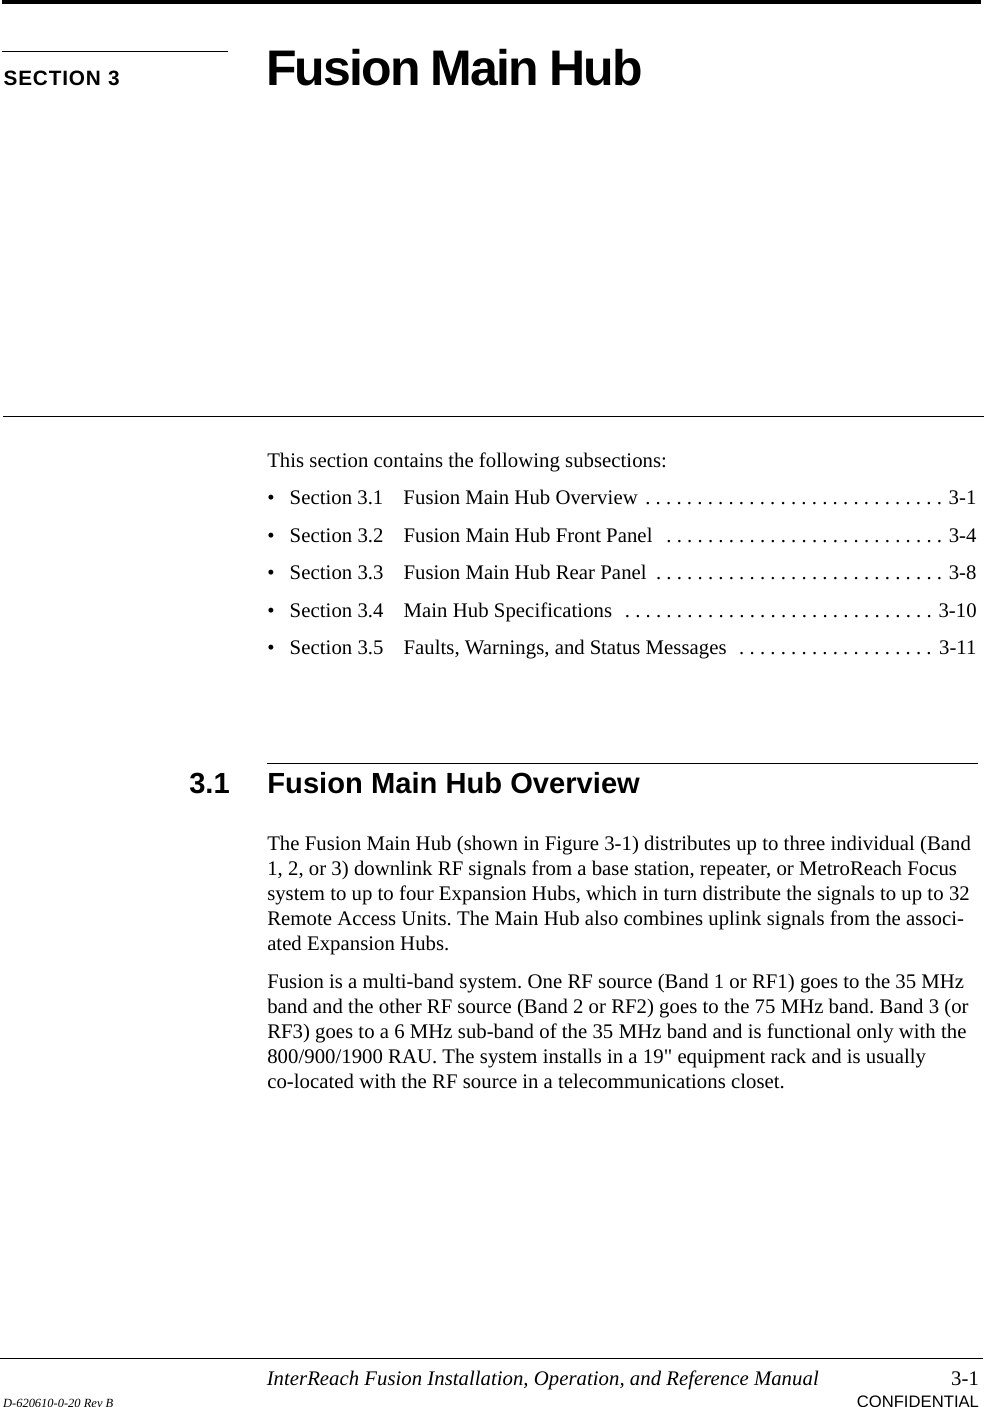 InterReach Fusion Installation, Operation, and Reference Manual 3-1D-620610-0-20 Rev B CONFIDENTIALSECTION 3 Fusion Main HubThis section contains the following subsections:• Section 3.1   Fusion Main Hub Overview . . . . . . . . . . . . . . . . . . . . . . . . . . . . . 3-1• Section 3.2   Fusion Main Hub Front Panel  . . . . . . . . . . . . . . . . . . . . . . . . . . . 3-4• Section 3.3   Fusion Main Hub Rear Panel  . . . . . . . . . . . . . . . . . . . . . . . . . . . . 3-8• Section 3.4   Main Hub Specifications  . . . . . . . . . . . . . . . . . . . . . . . . . . . . . . 3-10• Section 3.5   Faults, Warnings, and Status Messages  . . . . . . . . . . . . . . . . . . . 3-113.1 Fusion Main Hub OverviewThe Fusion Main Hub (shown in Figure 3-1) distributes up to three individual (Band 1, 2, or 3) downlink RF signals from a base station, repeater, or MetroReach Focus system to up to four Expansion Hubs, which in turn distribute the signals to up to 32 Remote Access Units. The Main Hub also combines uplink signals from the associ-ated Expansion Hubs.Fusion is a multi-band system. One RF source (Band 1 or RF1) goes to the 35 MHz band and the other RF source (Band 2 or RF2) goes to the 75 MHz band. Band 3 (or RF3) goes to a 6 MHz sub-band of the 35 MHz band and is functional only with the 800/900/1900 RAU. The system installs in a 19&quot; equipment rack and is usually co-located with the RF source in a telecommunications closet.